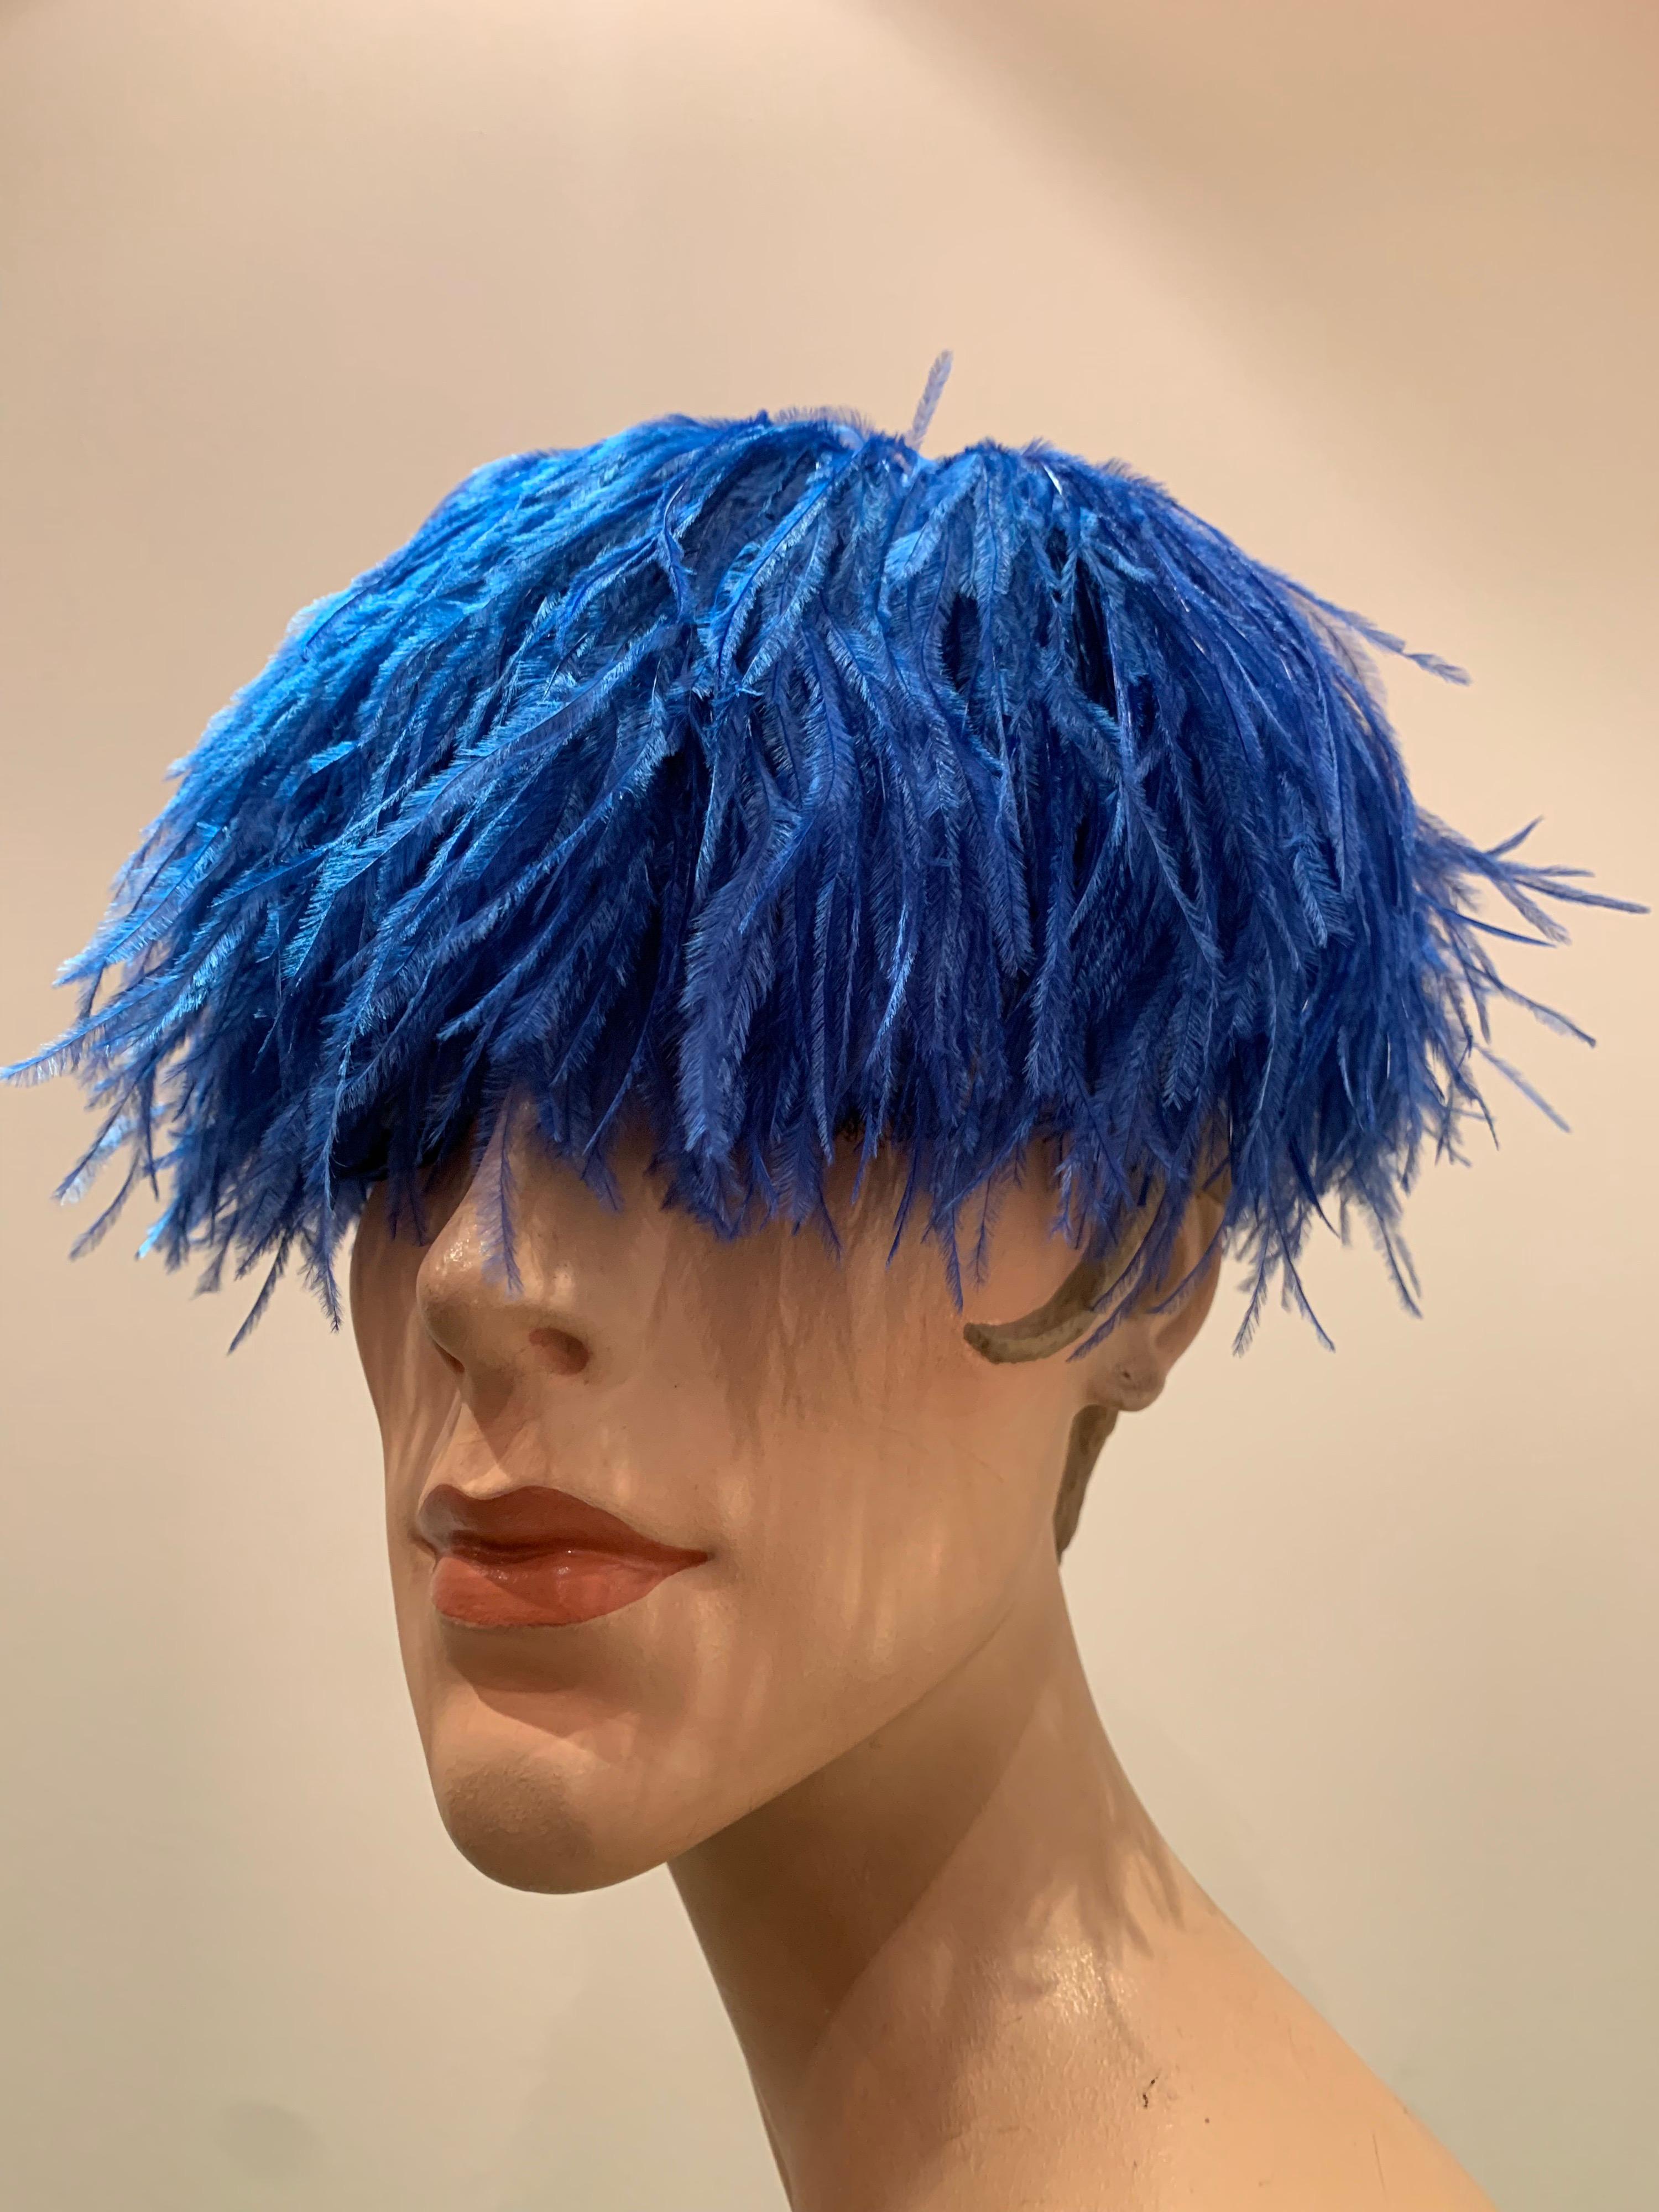 A fabulous 1950s-early 1960s pill box hat from The Woodward Shops covered entirely with lush cobalt blue ostrich feathers with a button-like swirl at center top. Base constructed of stiffened tulle. 